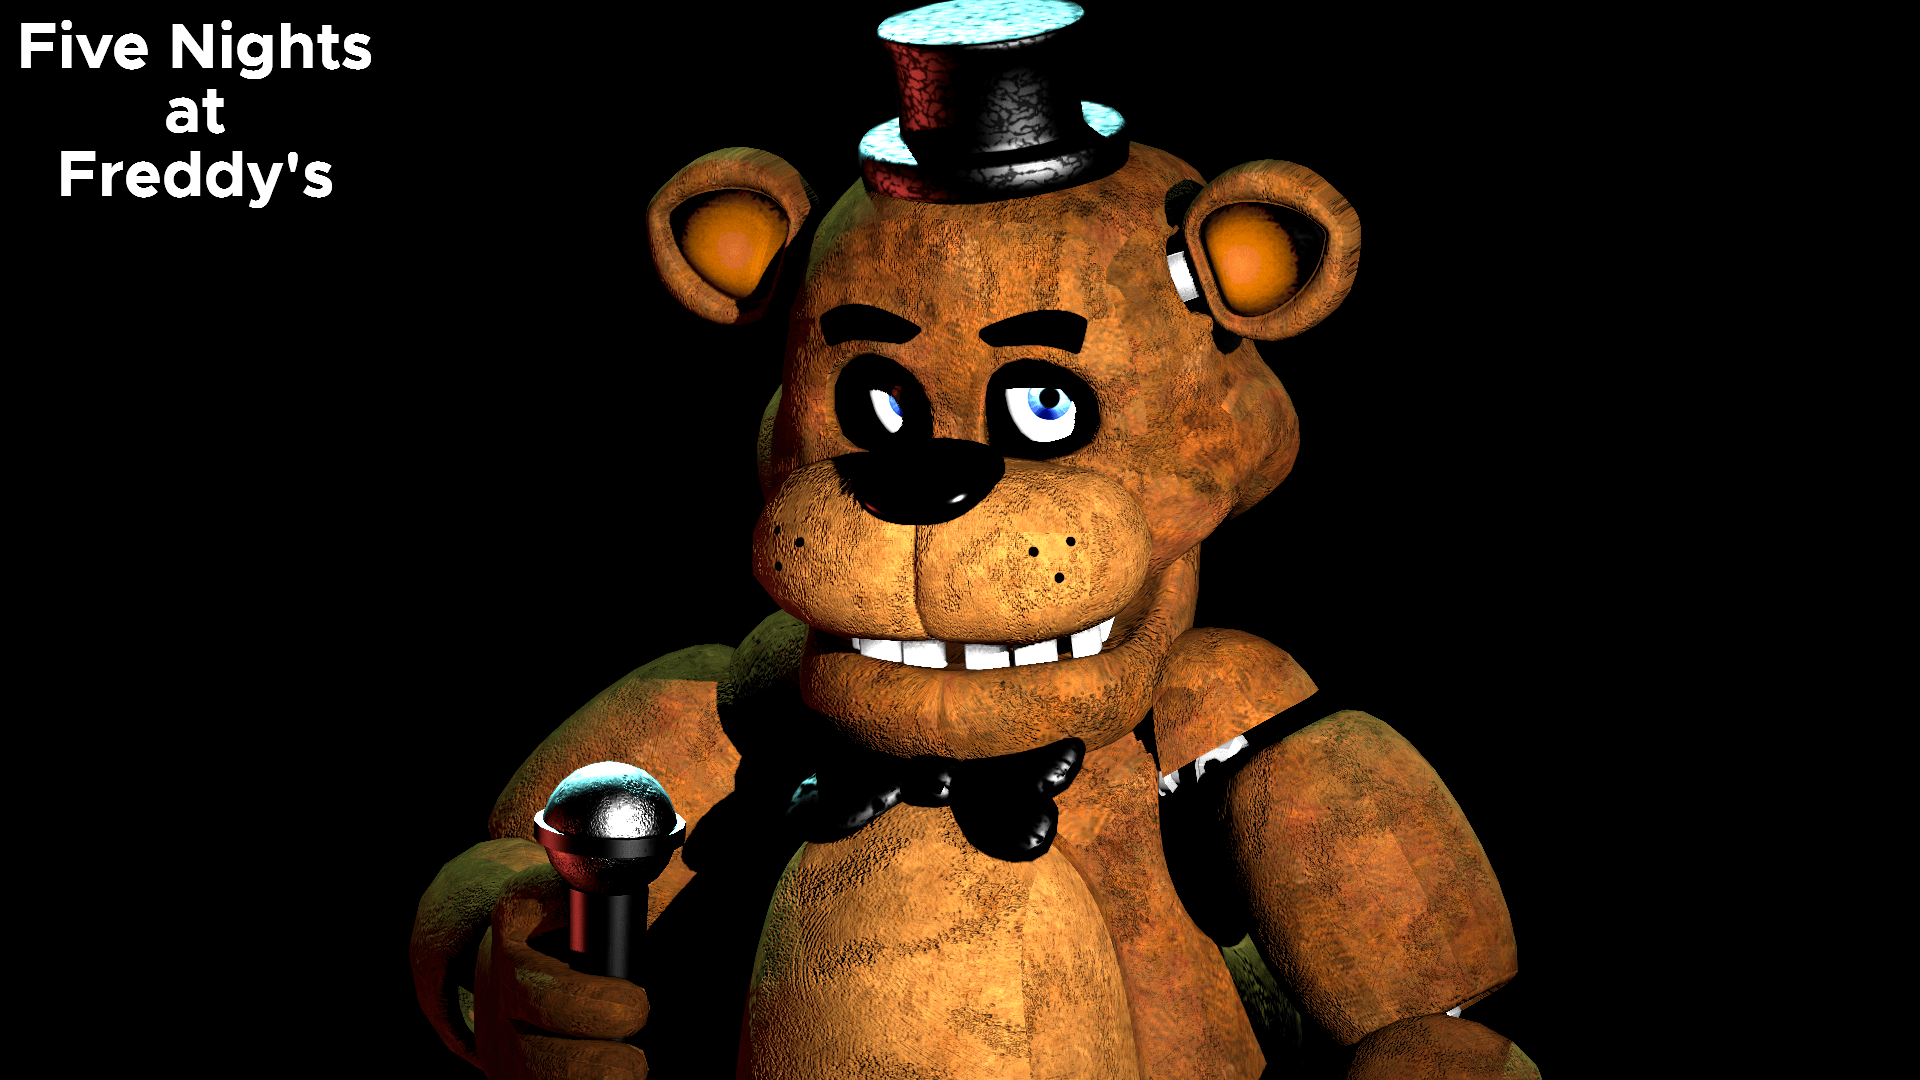 Wallpaper preview Full will be shown on FNaF 1's Bday